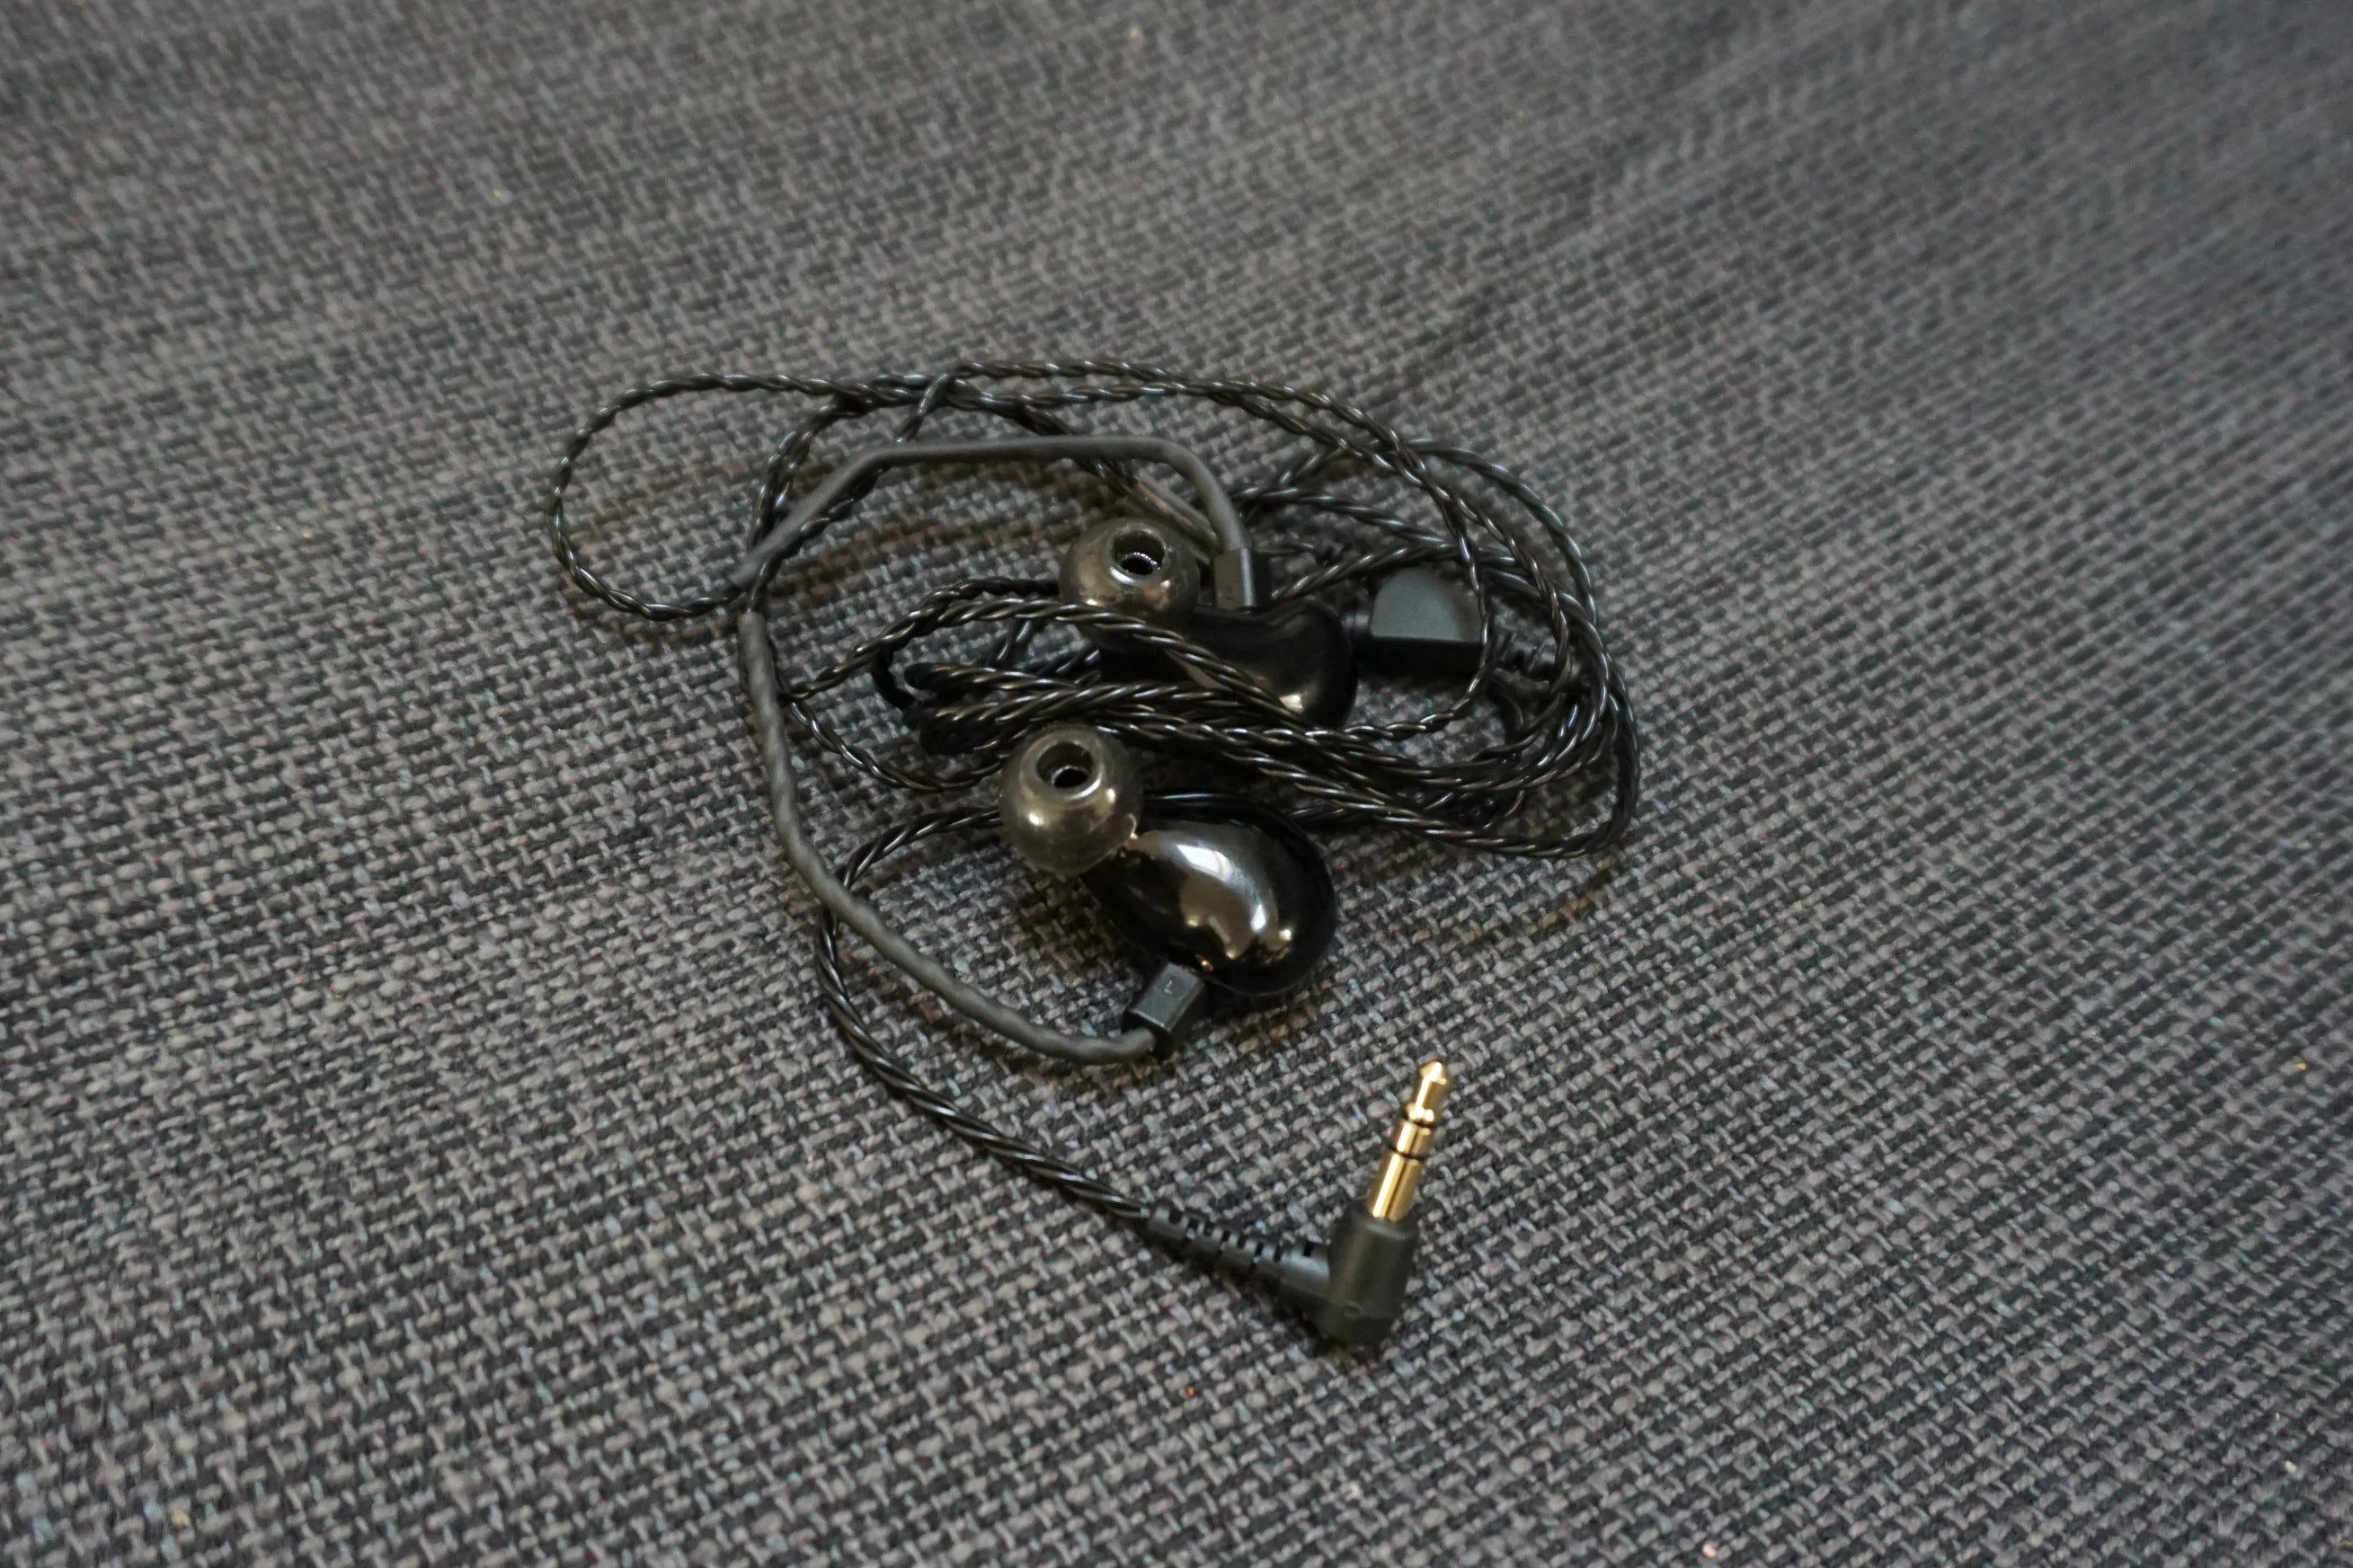 Fender FXA2 in-ear monitors with braided cable on fabric.